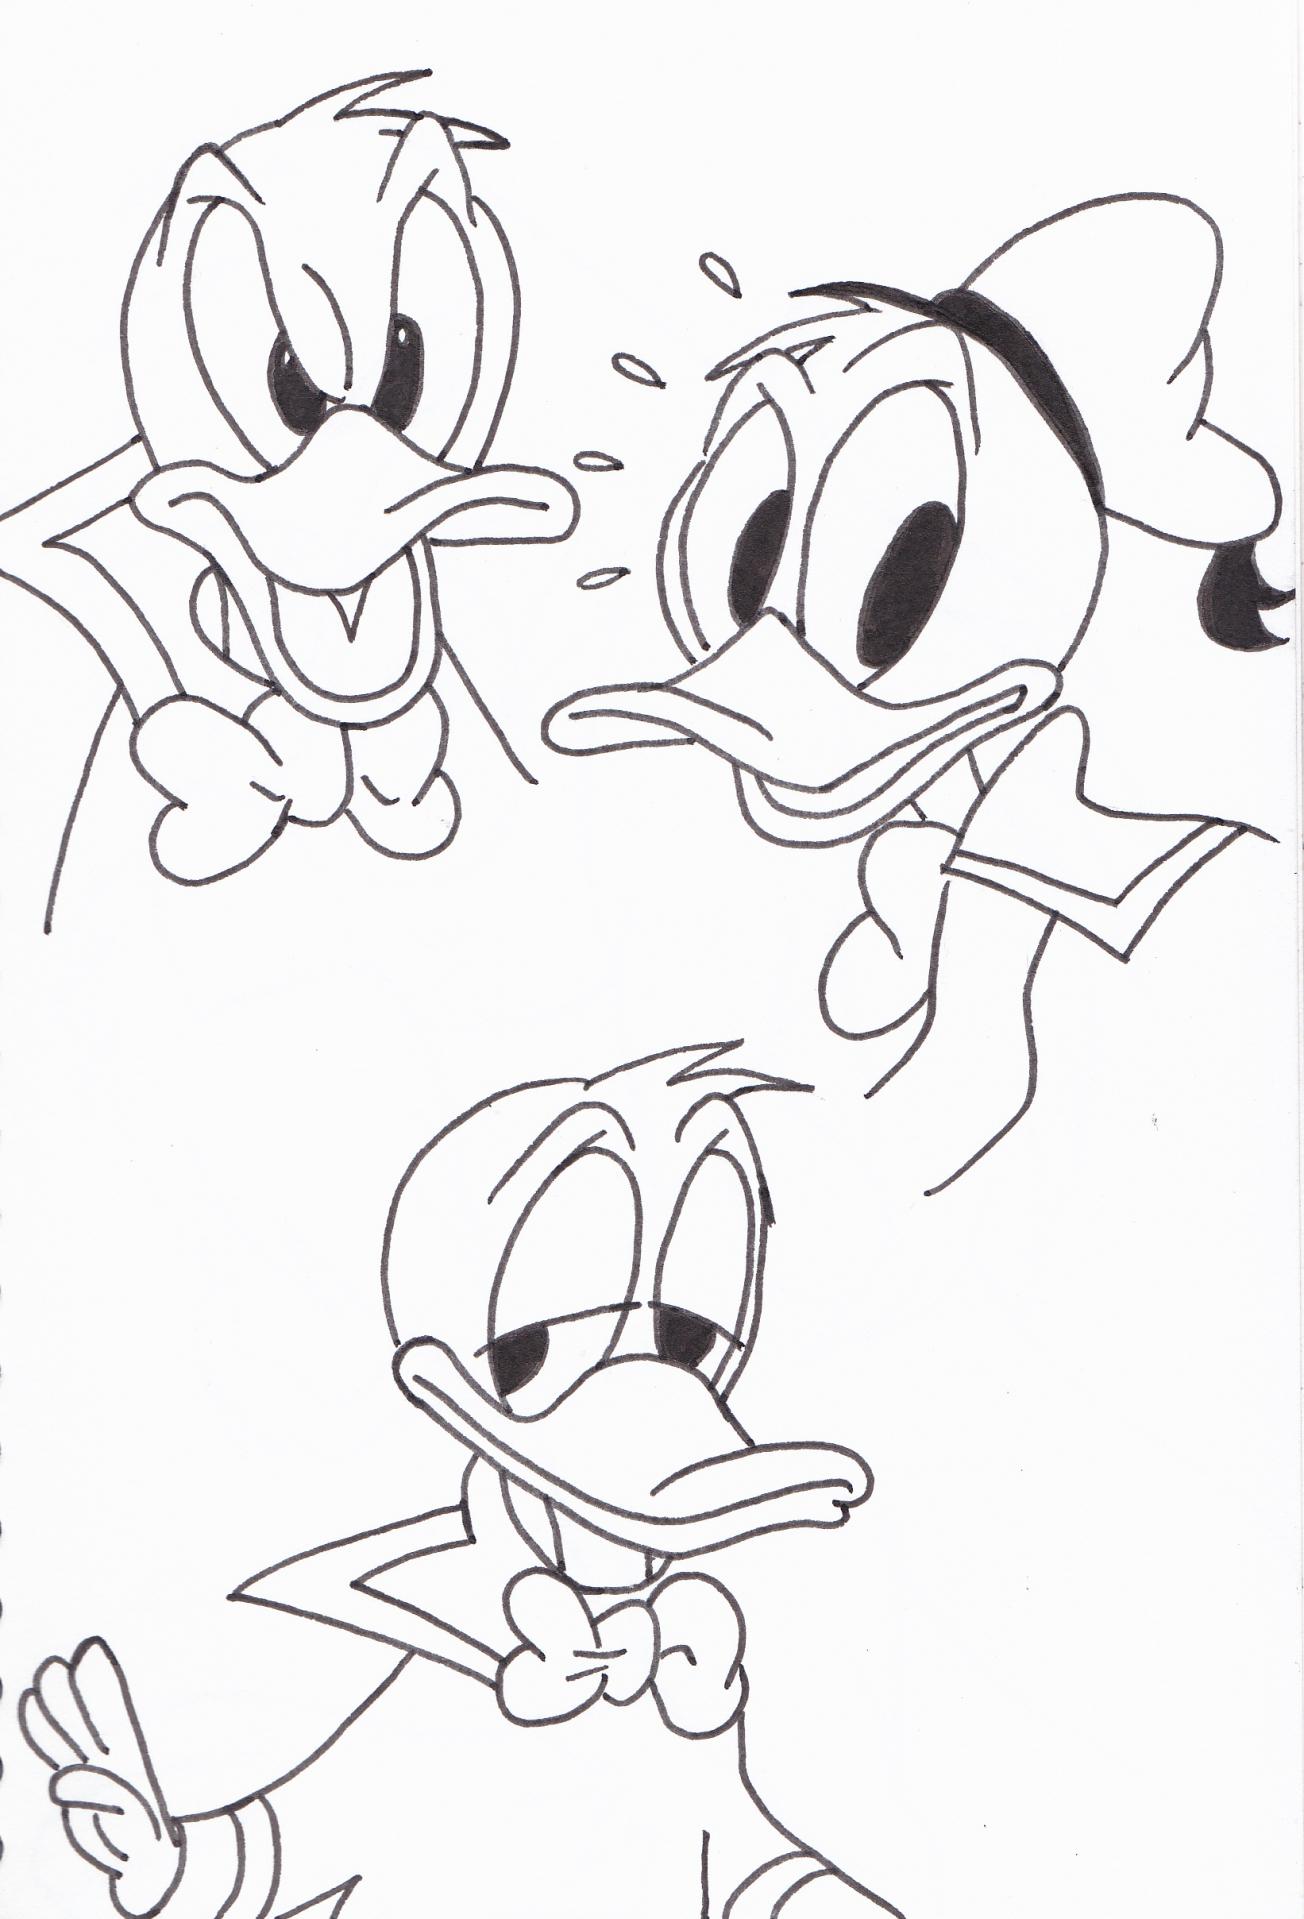 Donald (expressions)